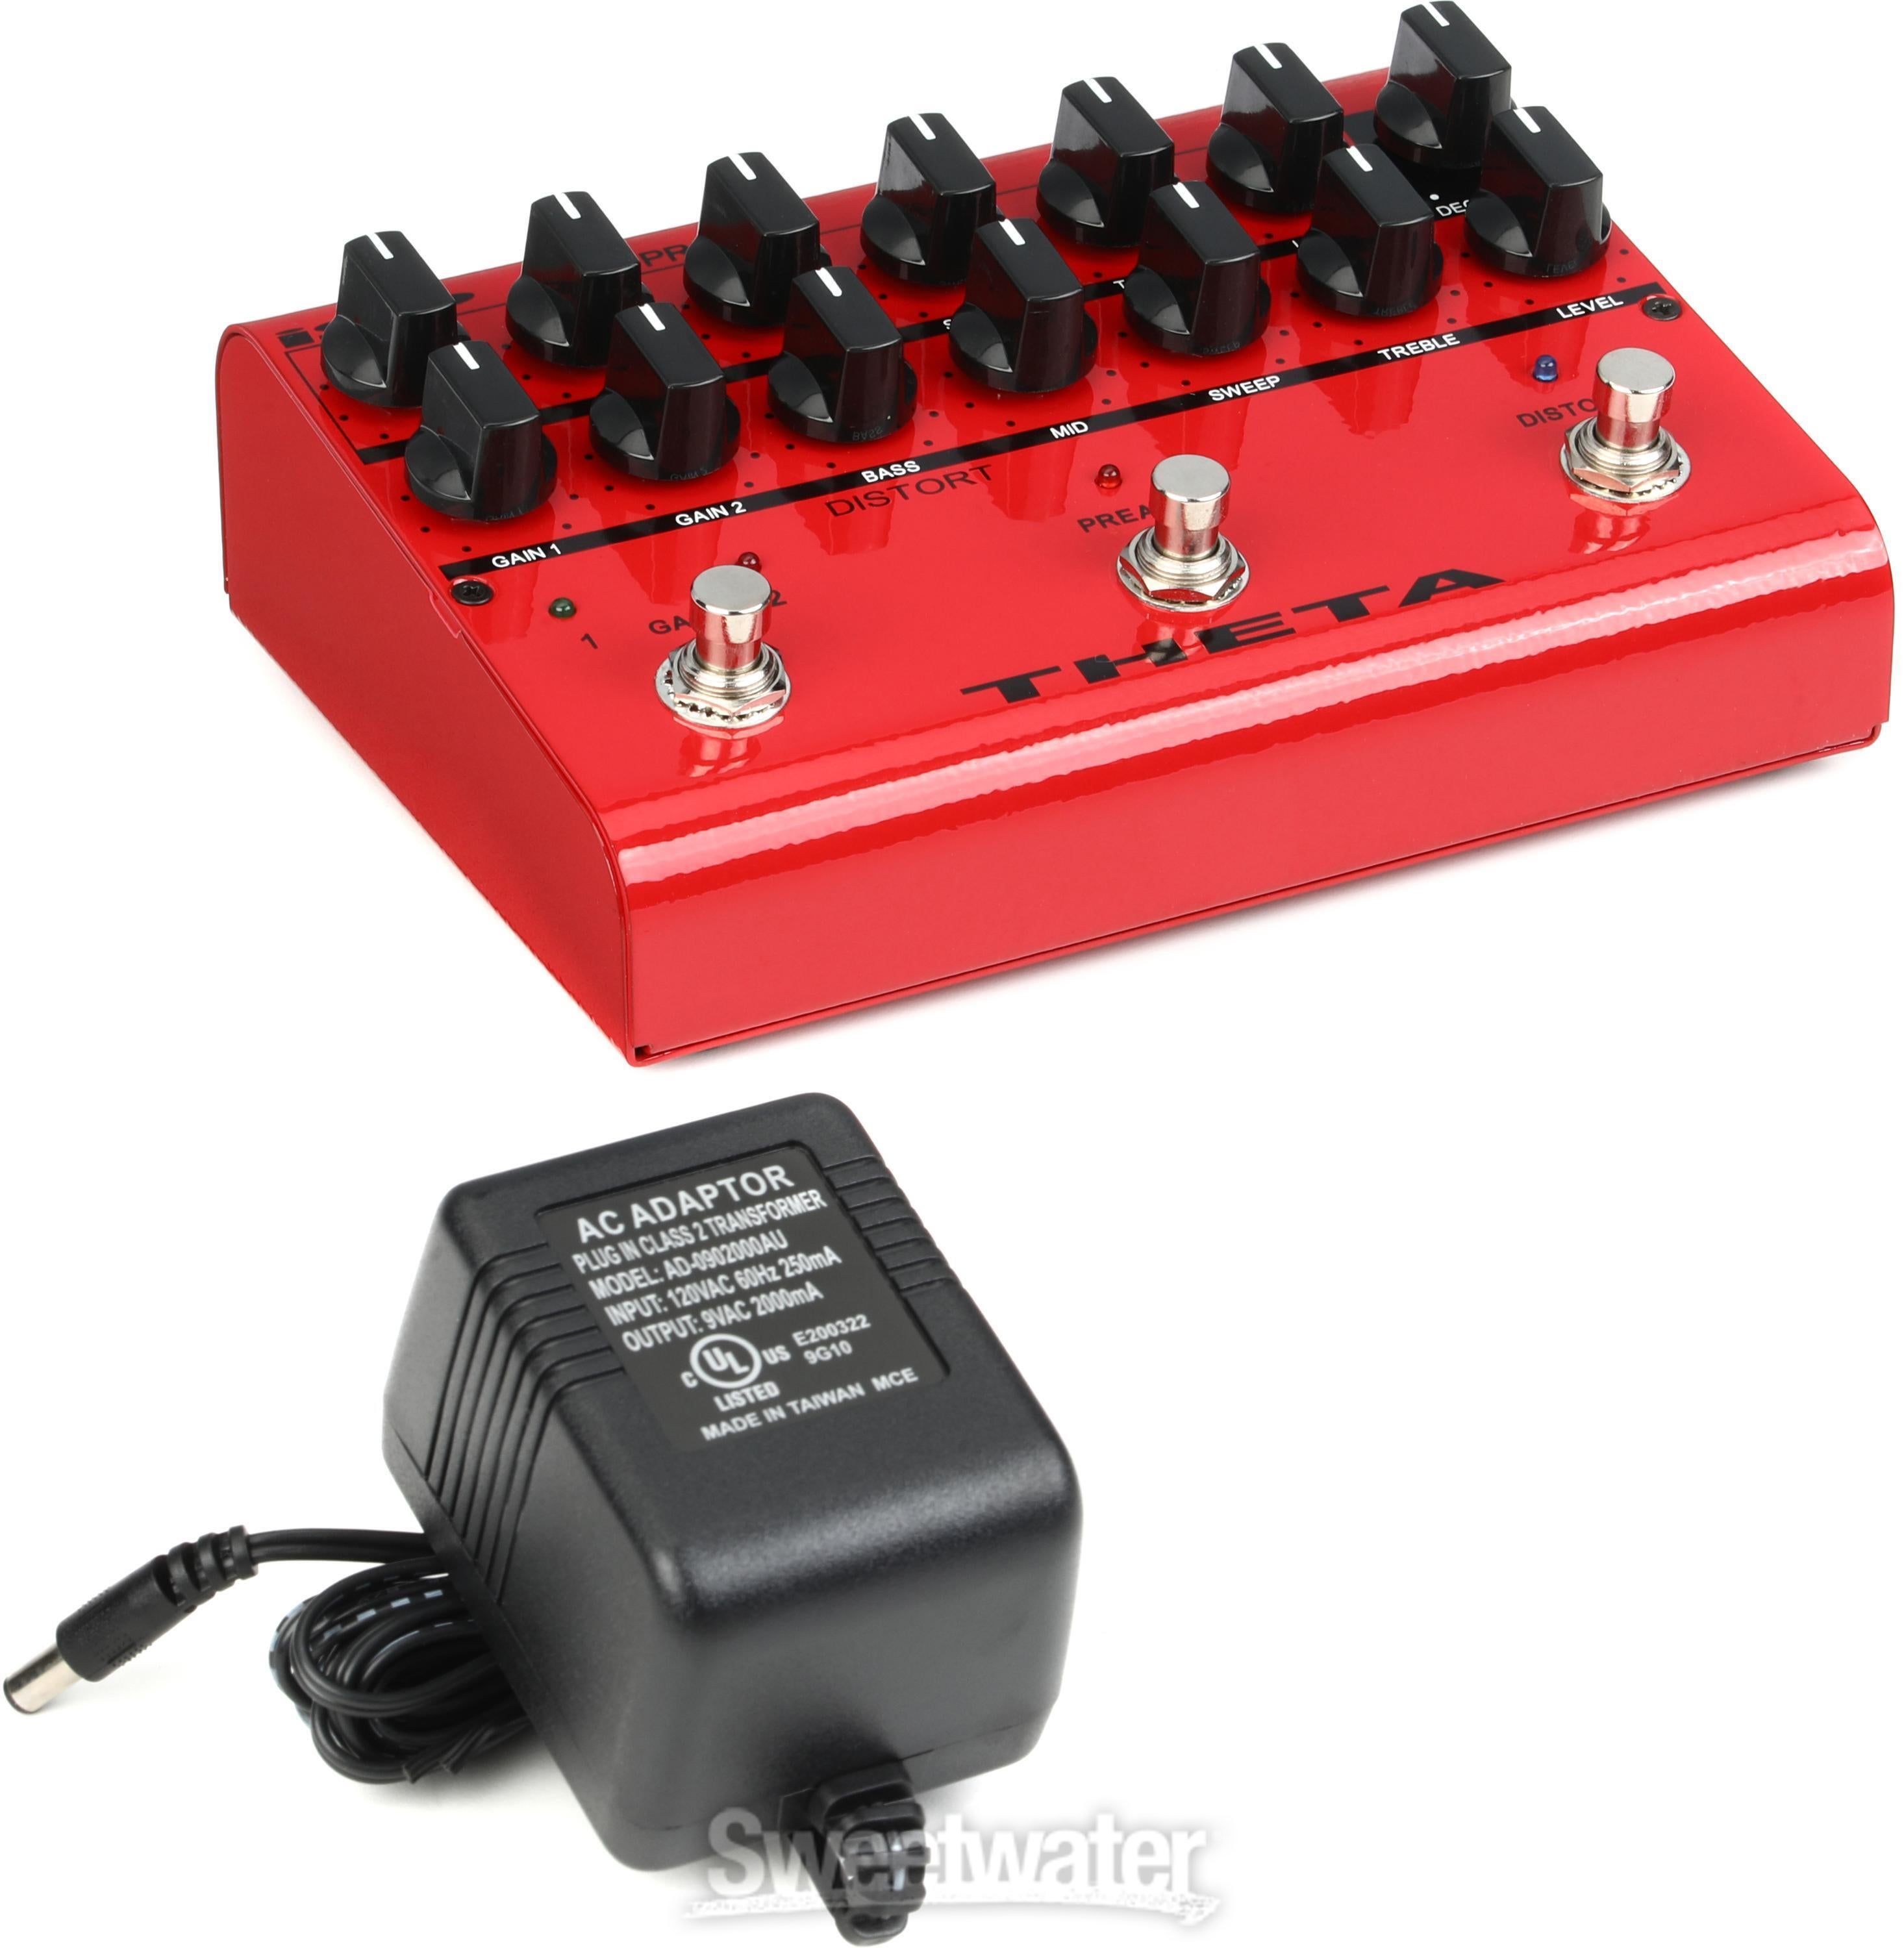 ISP Technologies Theta Preamp Distortion Pedal with Decimator Noise  Reduction | Sweetwater